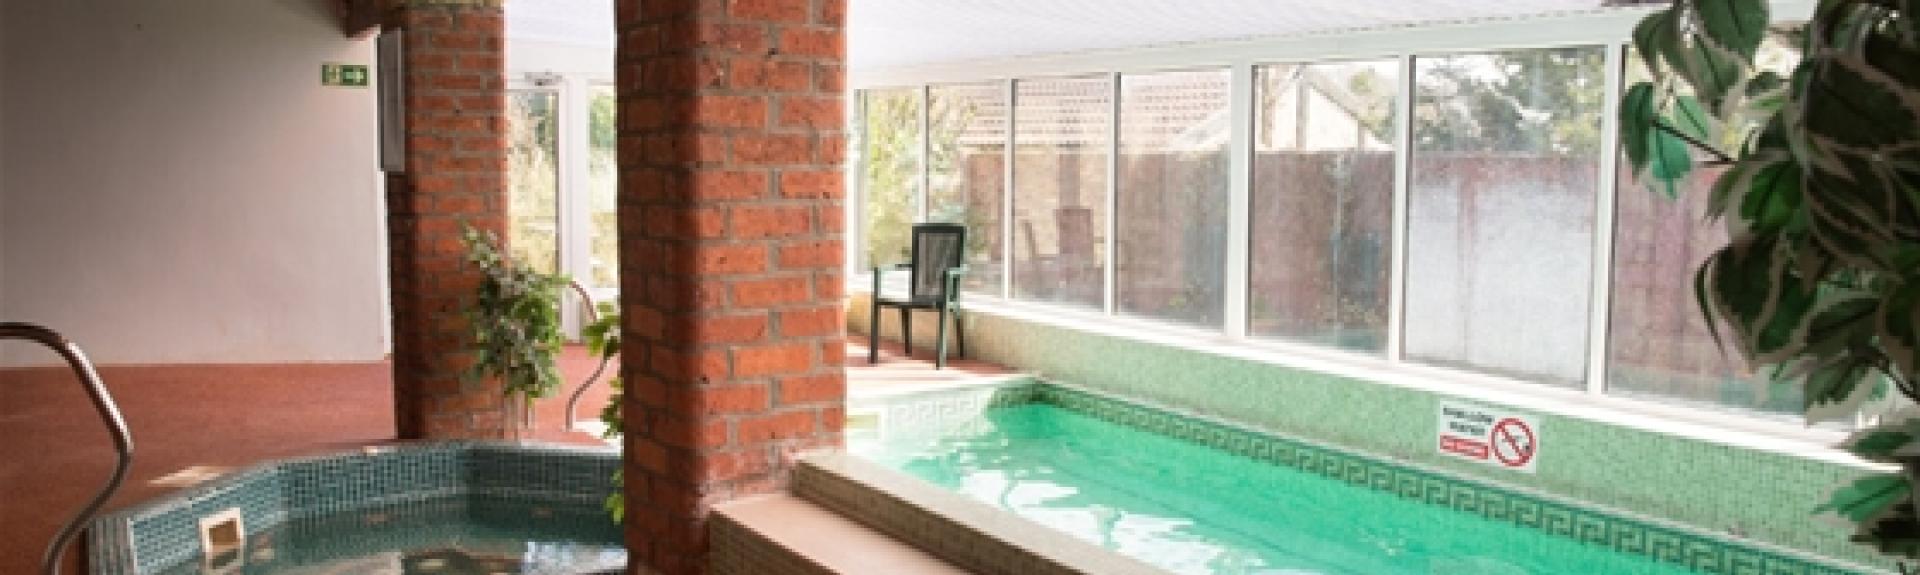 An indoor heated swimming pool at a Pickering holiday cottage